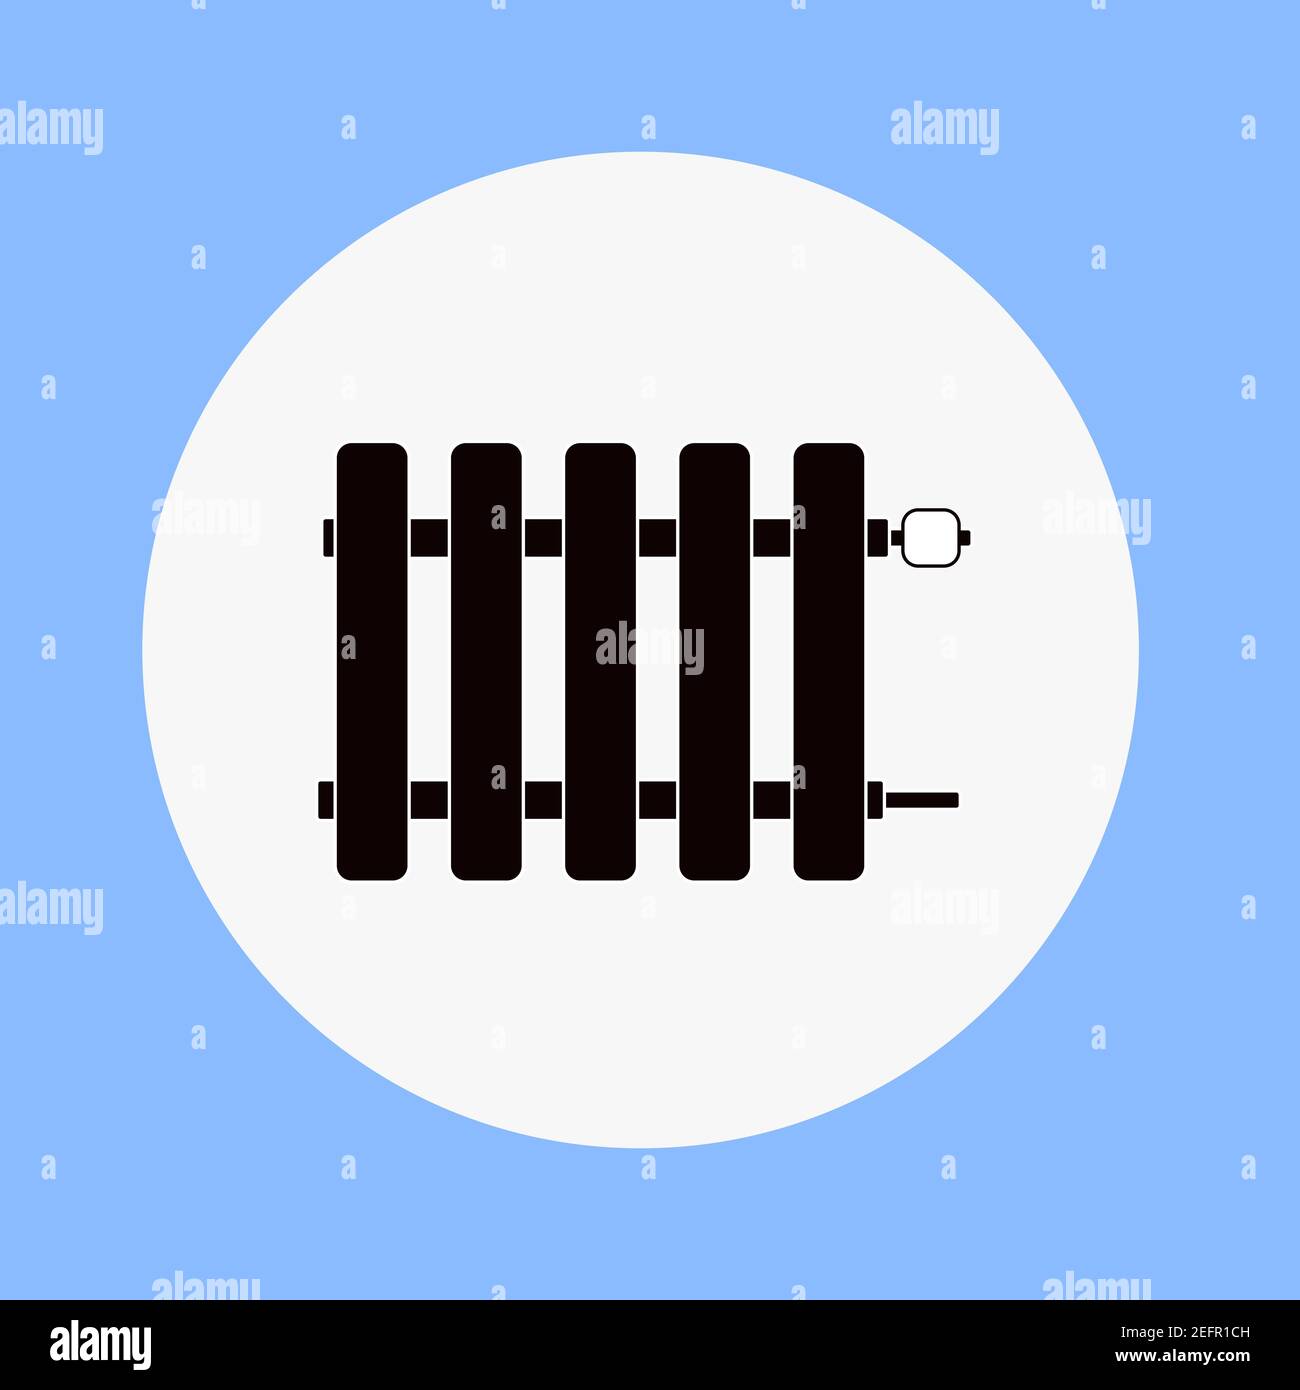 Heating radiator Vector. Heater icon. Battery for heating a room, apartment. Flat illustration. Stock Vector